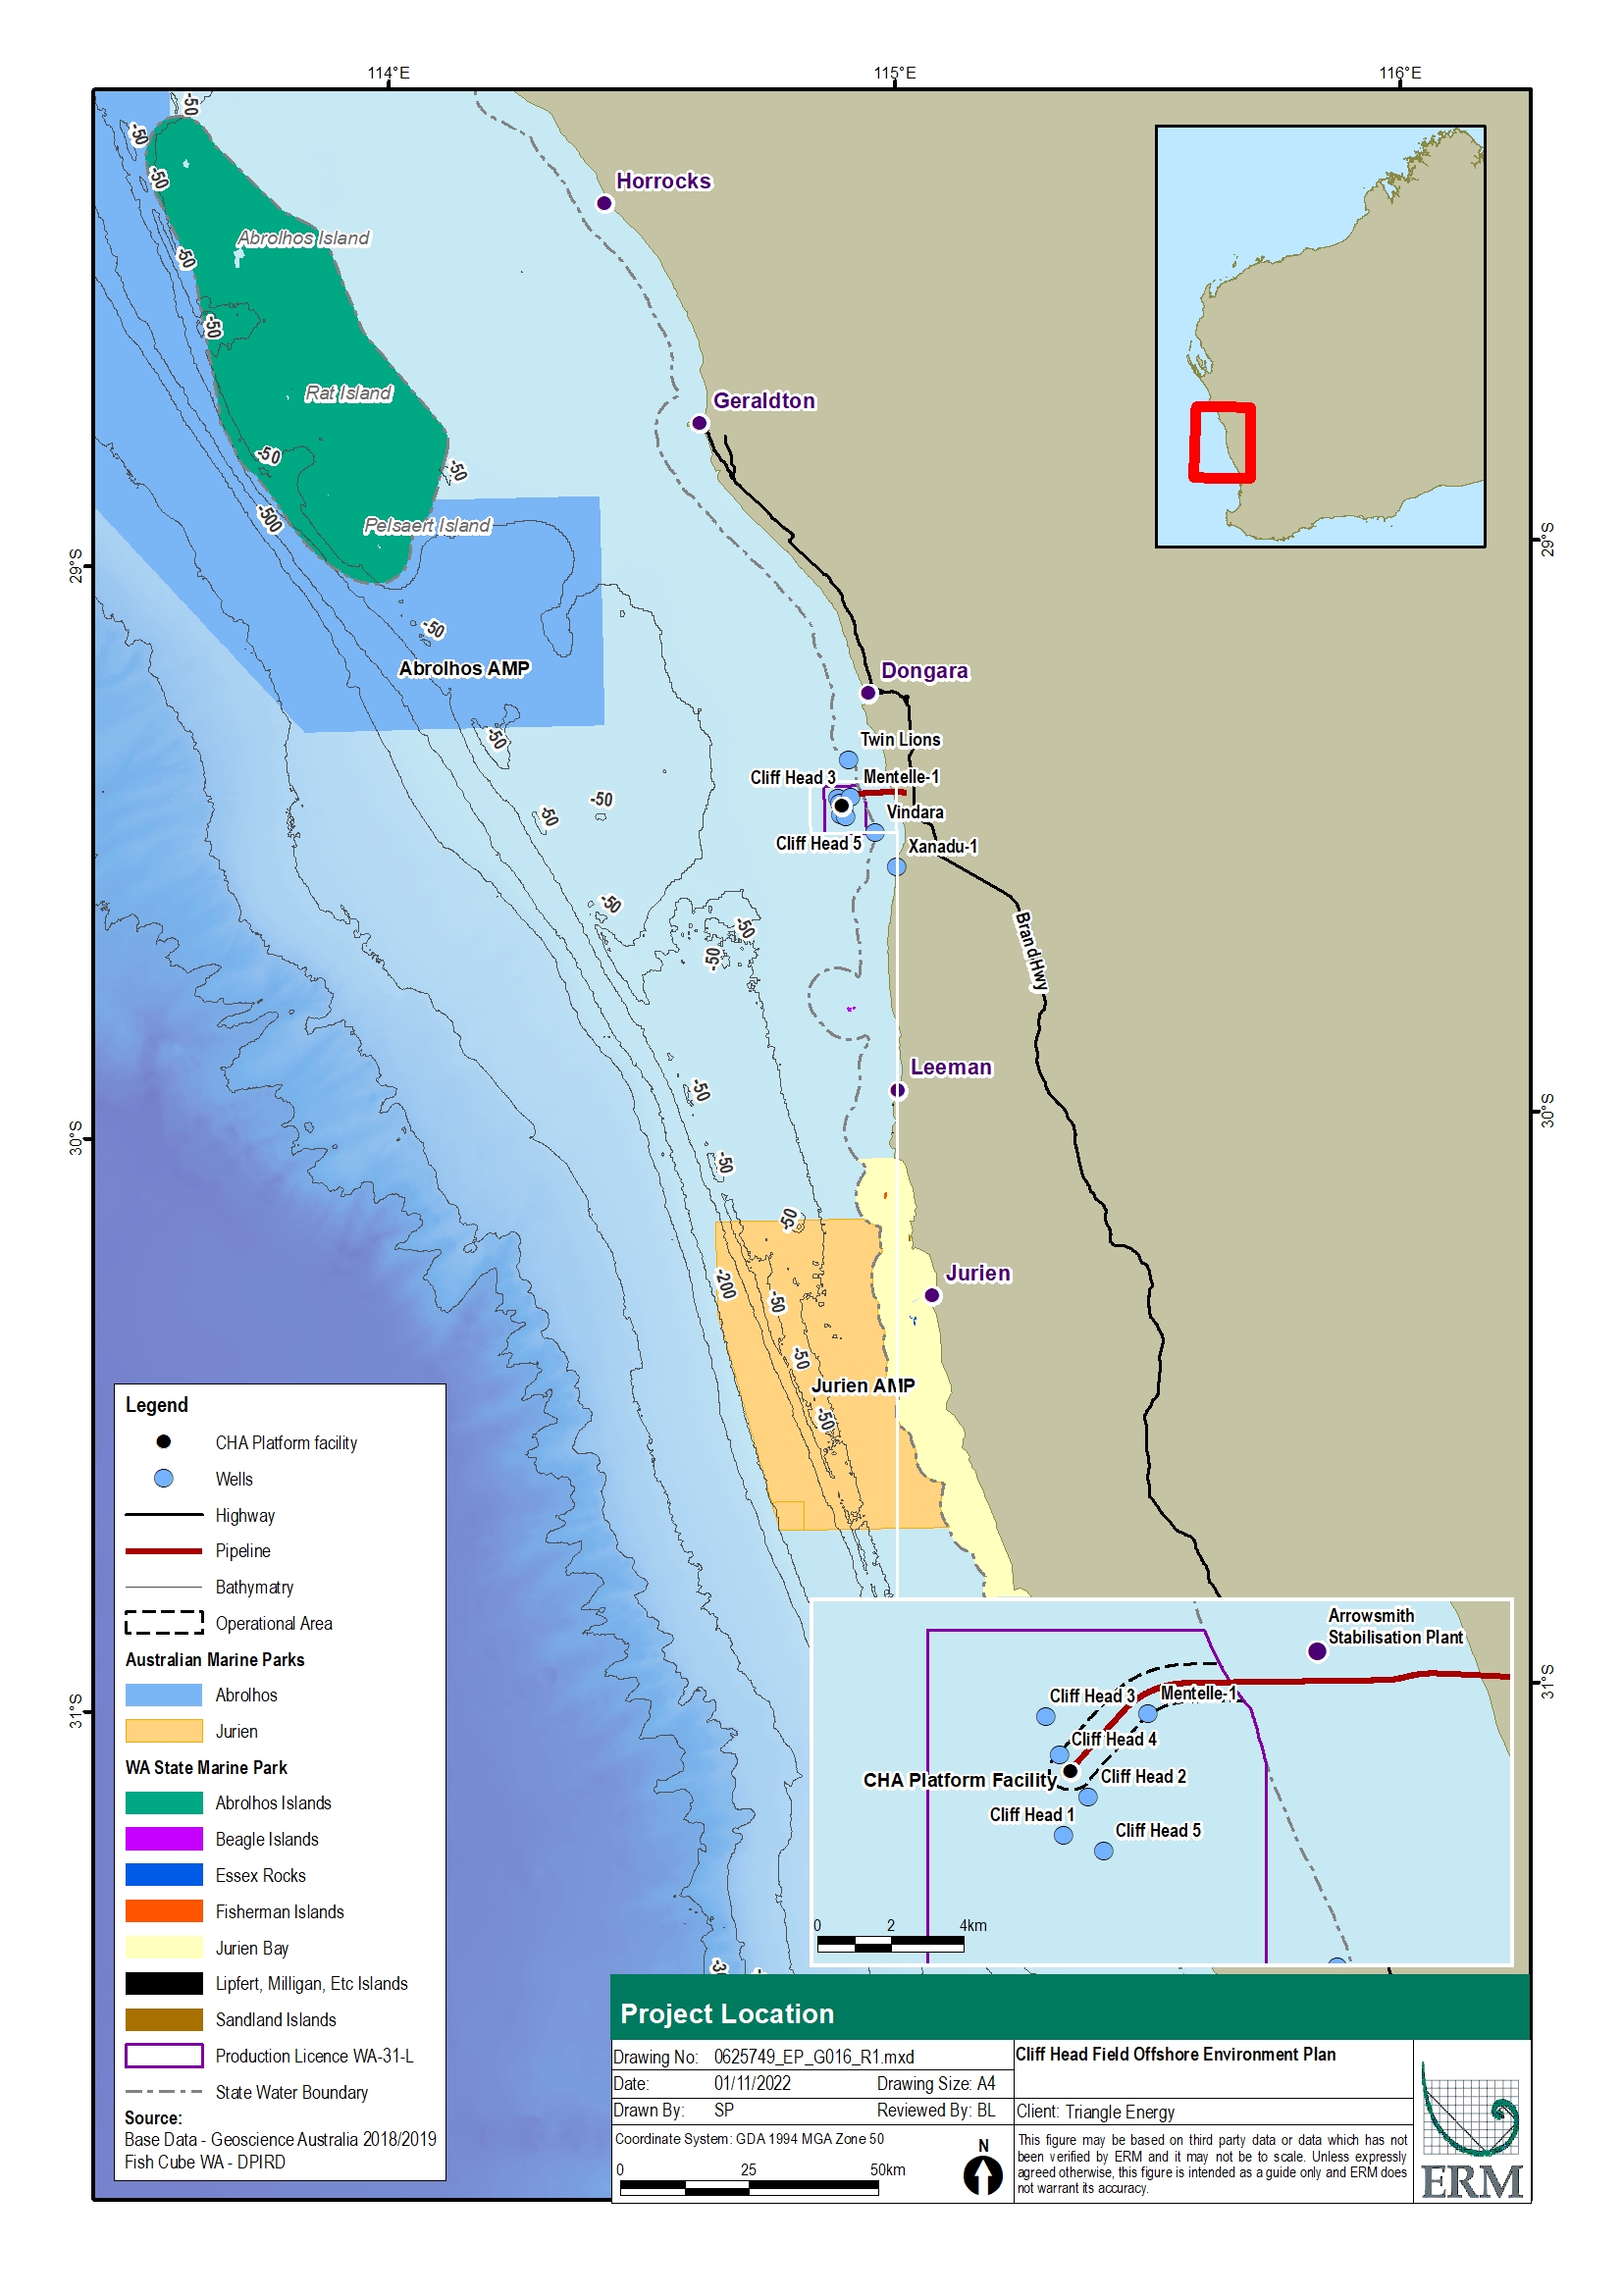 Location map - Activity: Cliff Head Field Offshore Operations (refer to description)